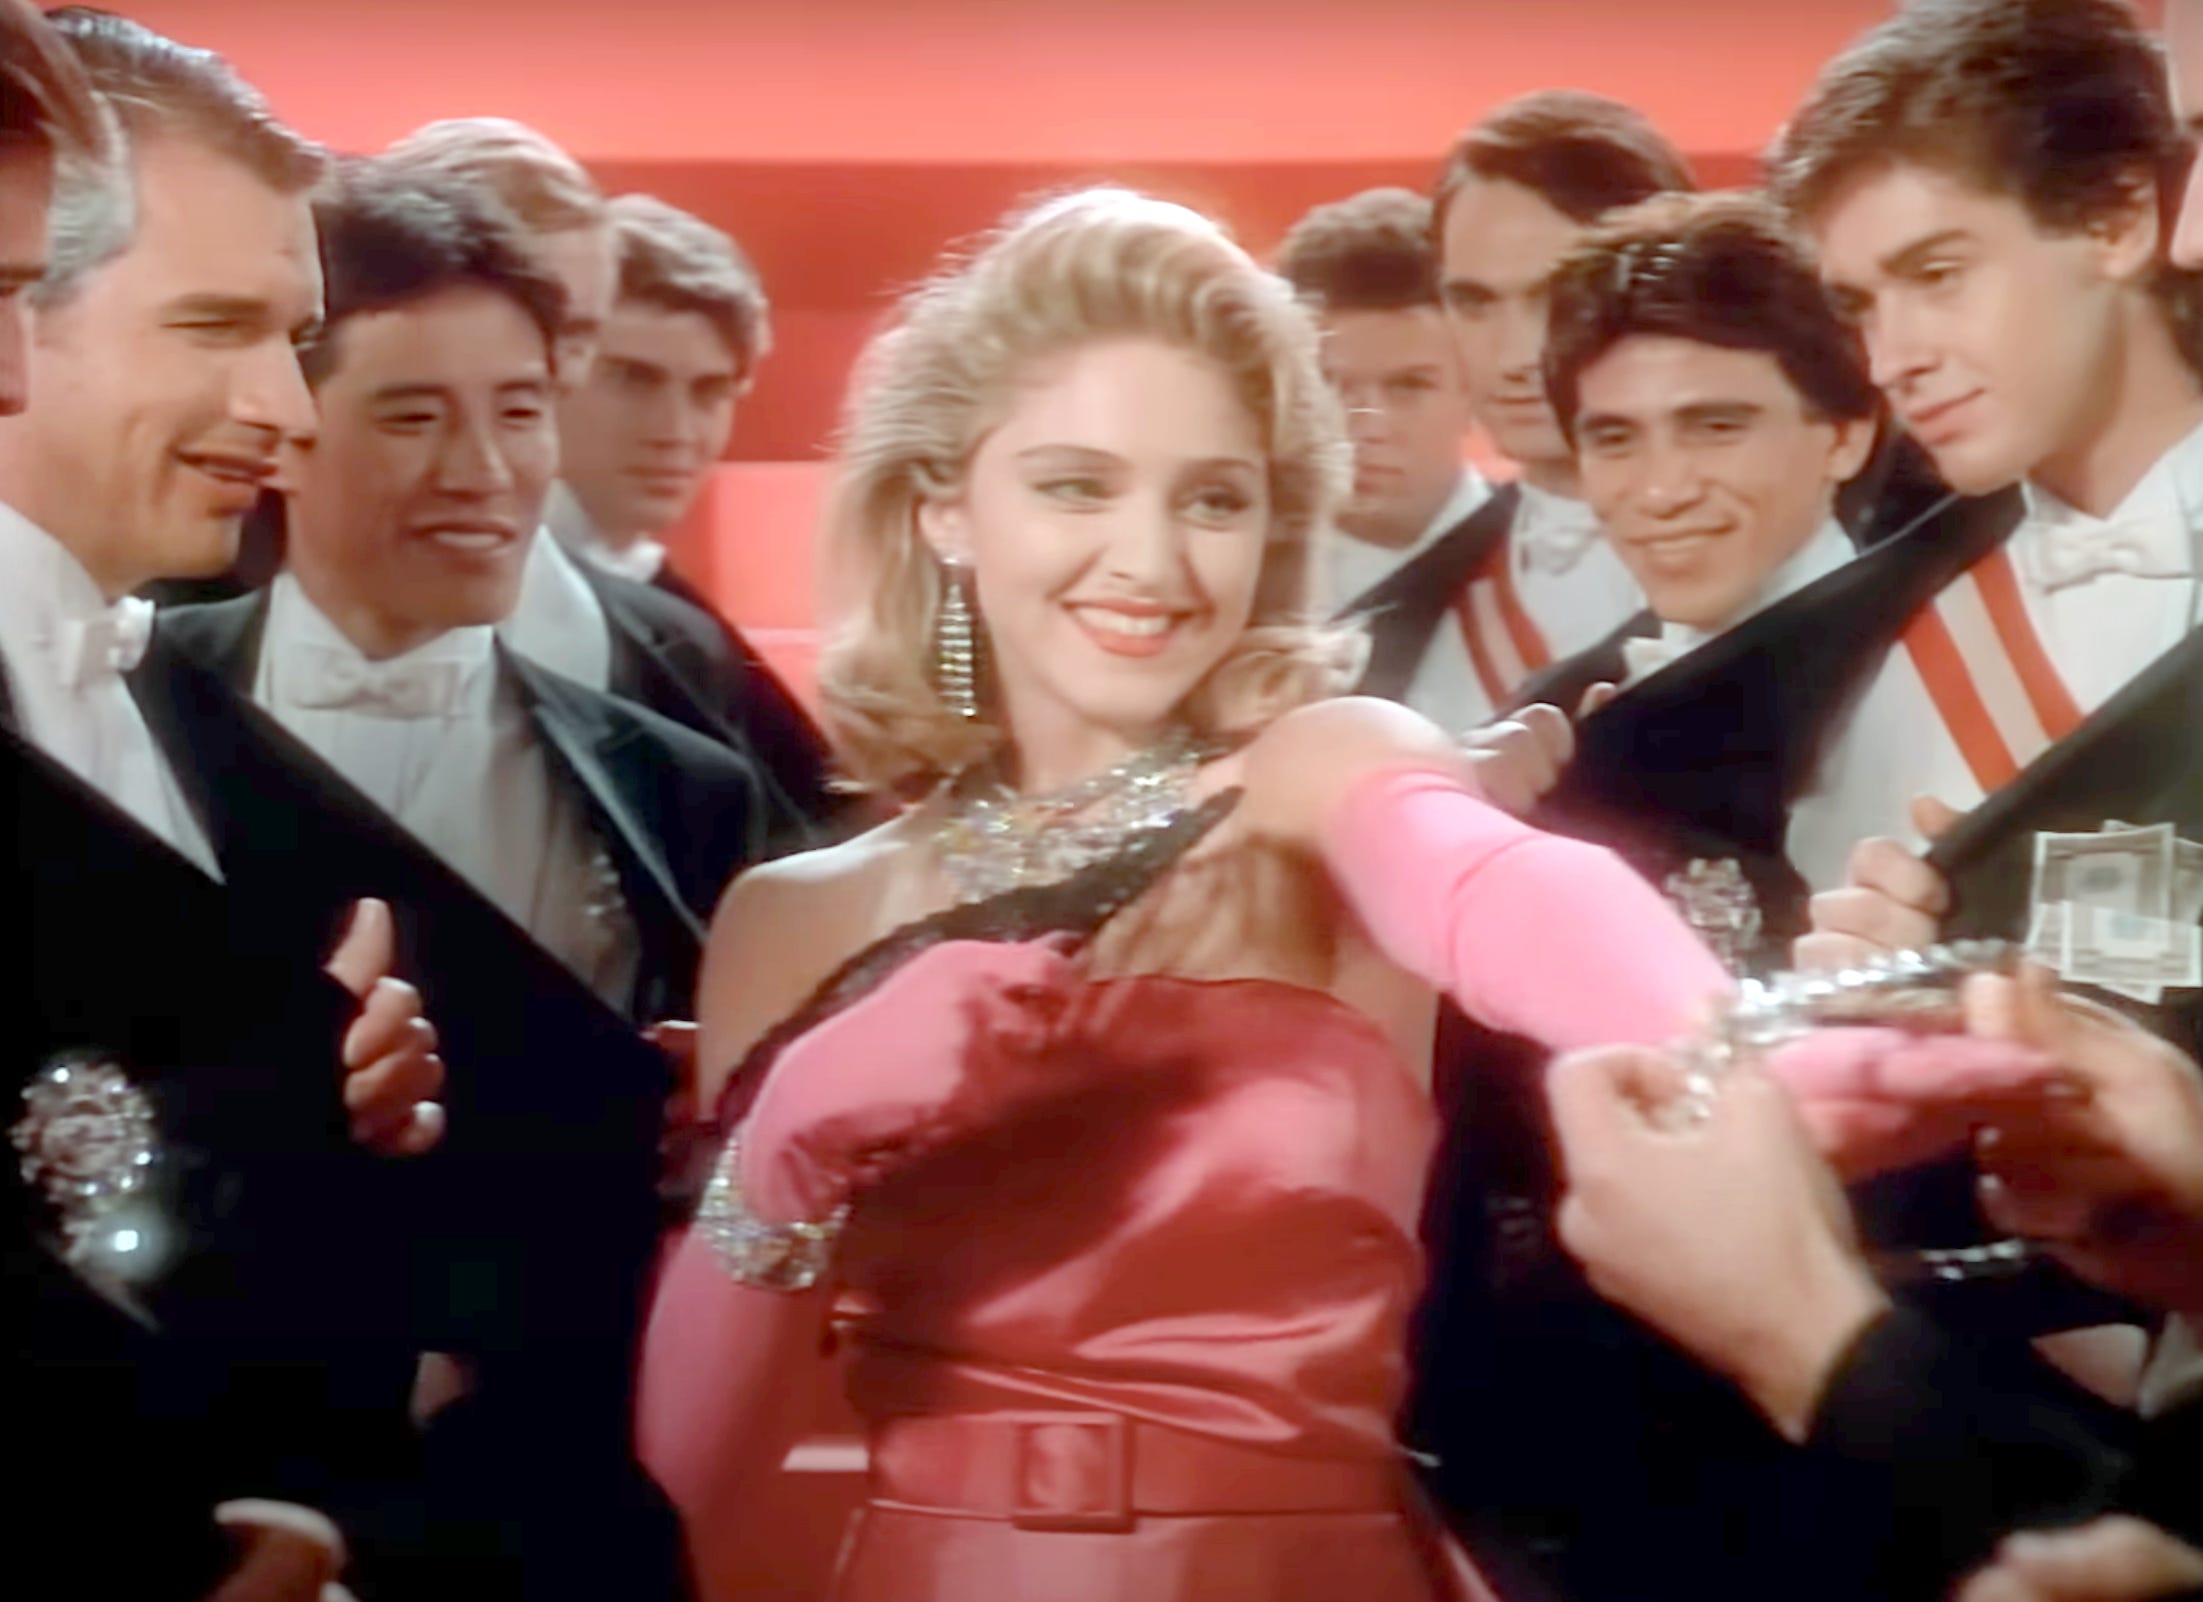 Madonna in the video for material girl, receiving jewels from the extras